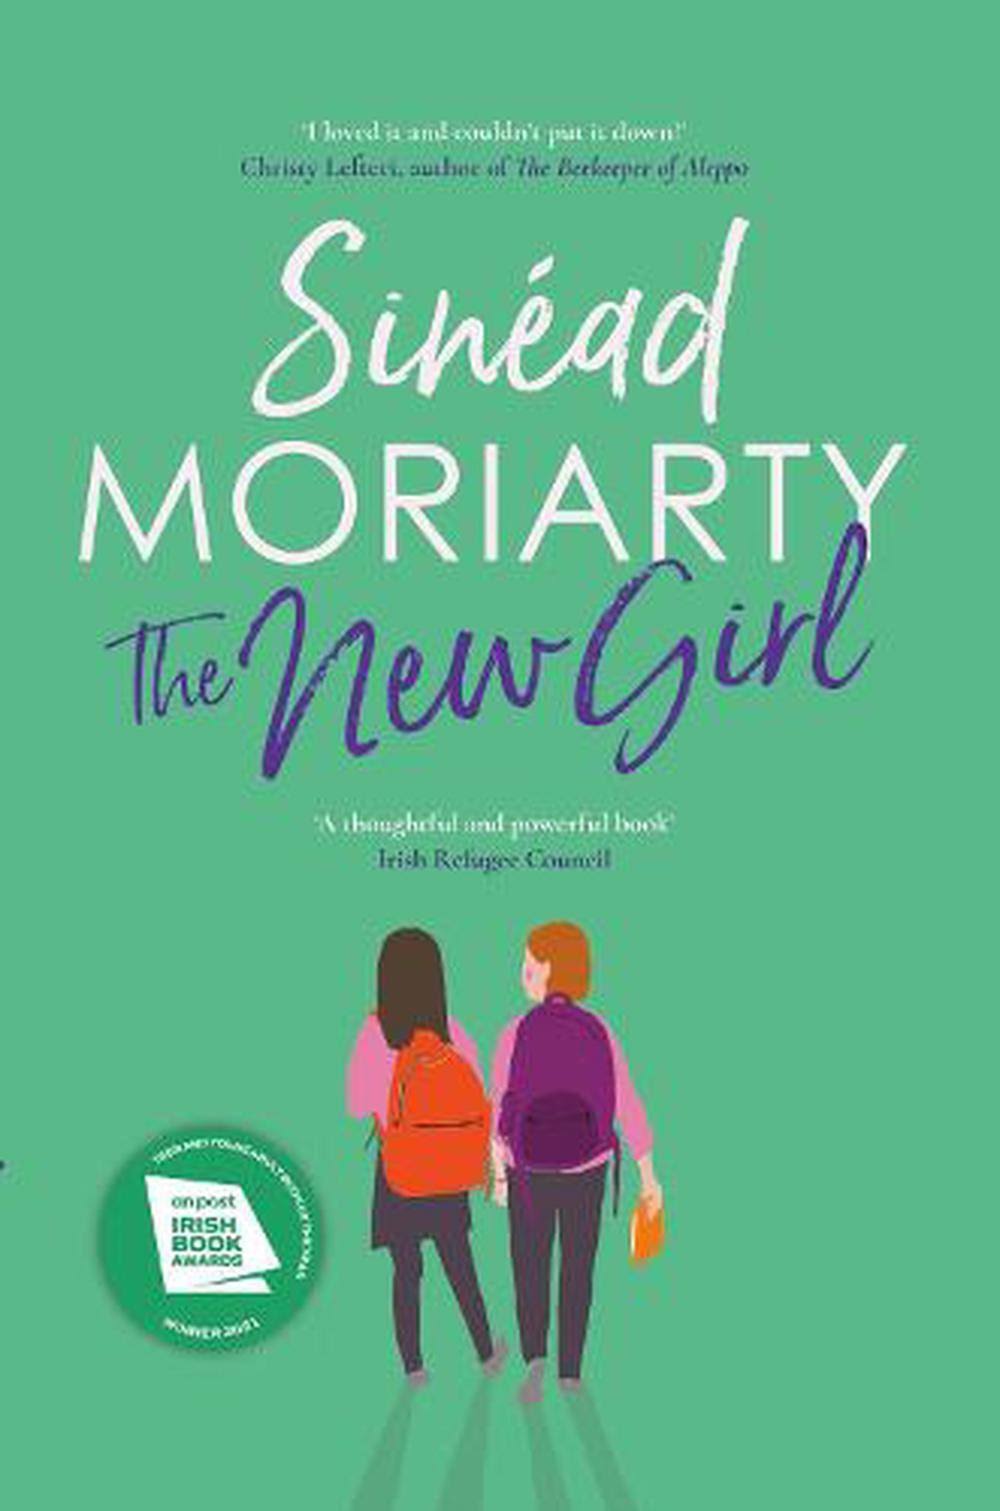 The New Girl [Book]